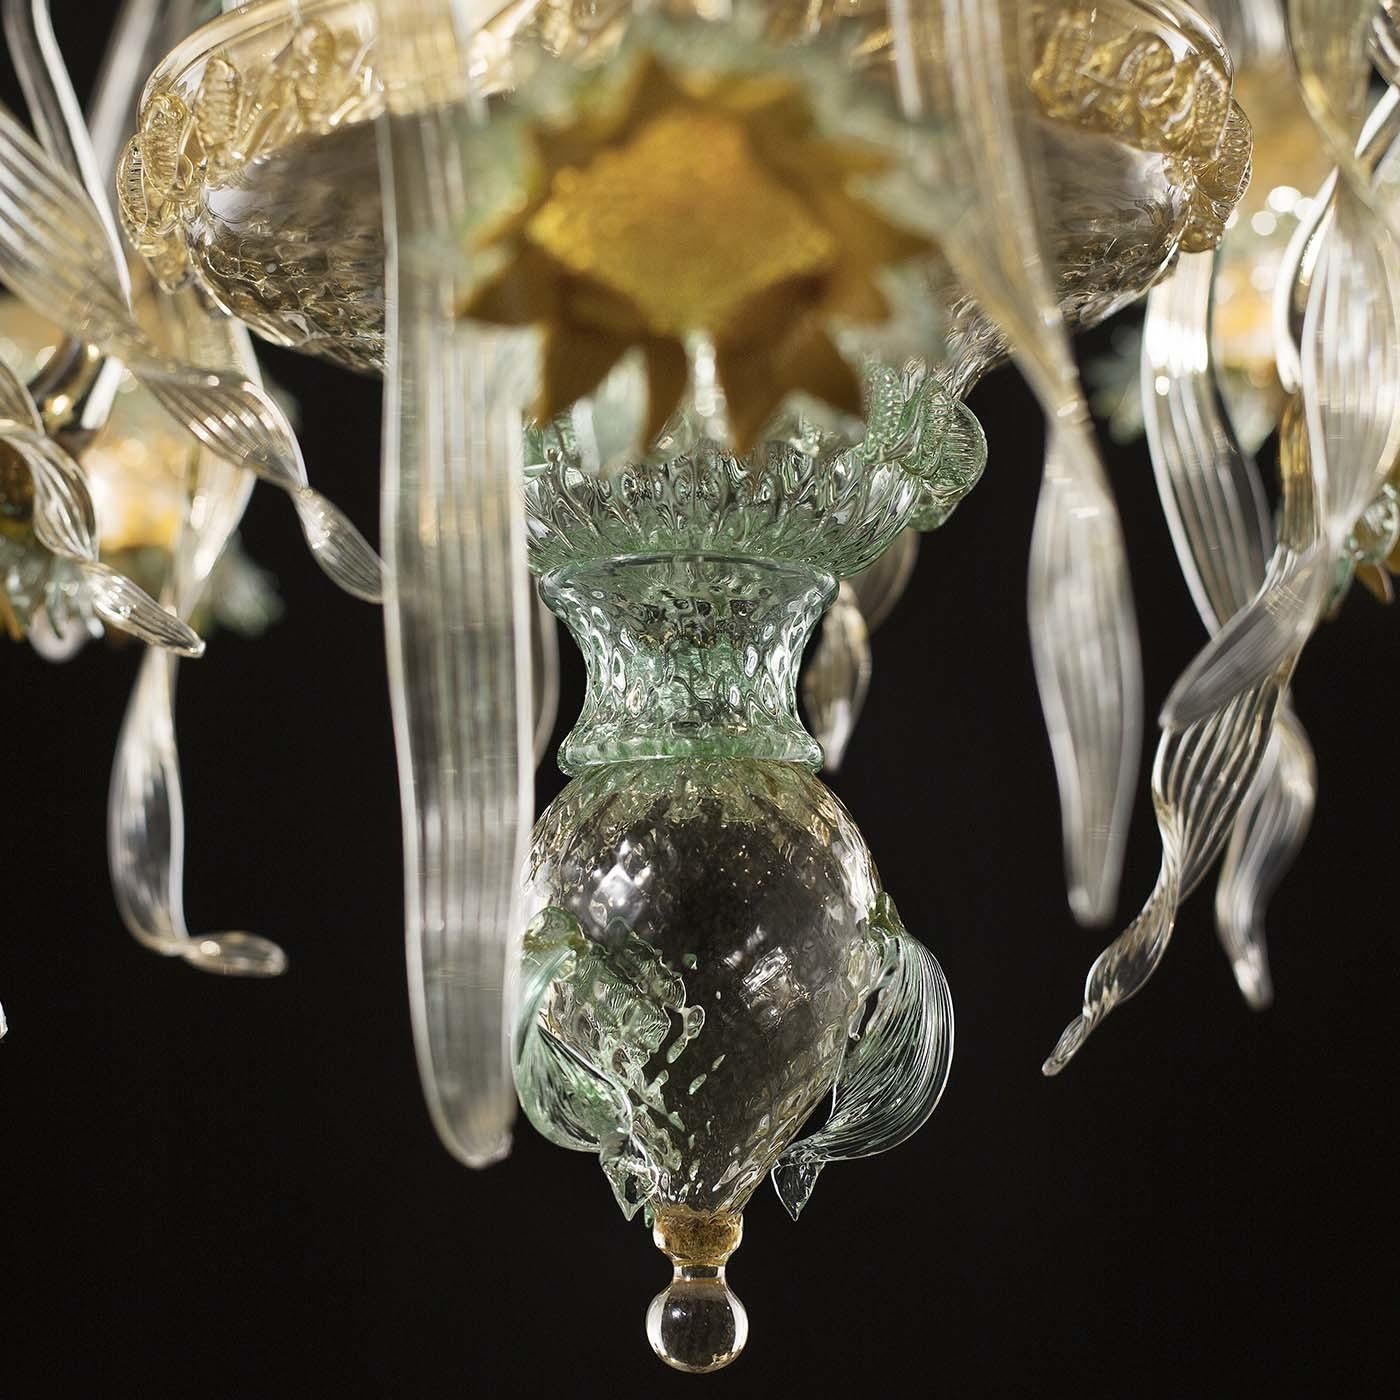 An homage to the famous painting by Van Gogh, this artistic glass chandelier will be the absolute protagonist in any interior, with the summer-inviting composition of flowers with the unmistakable sun-like appearance (girasole is Italian for